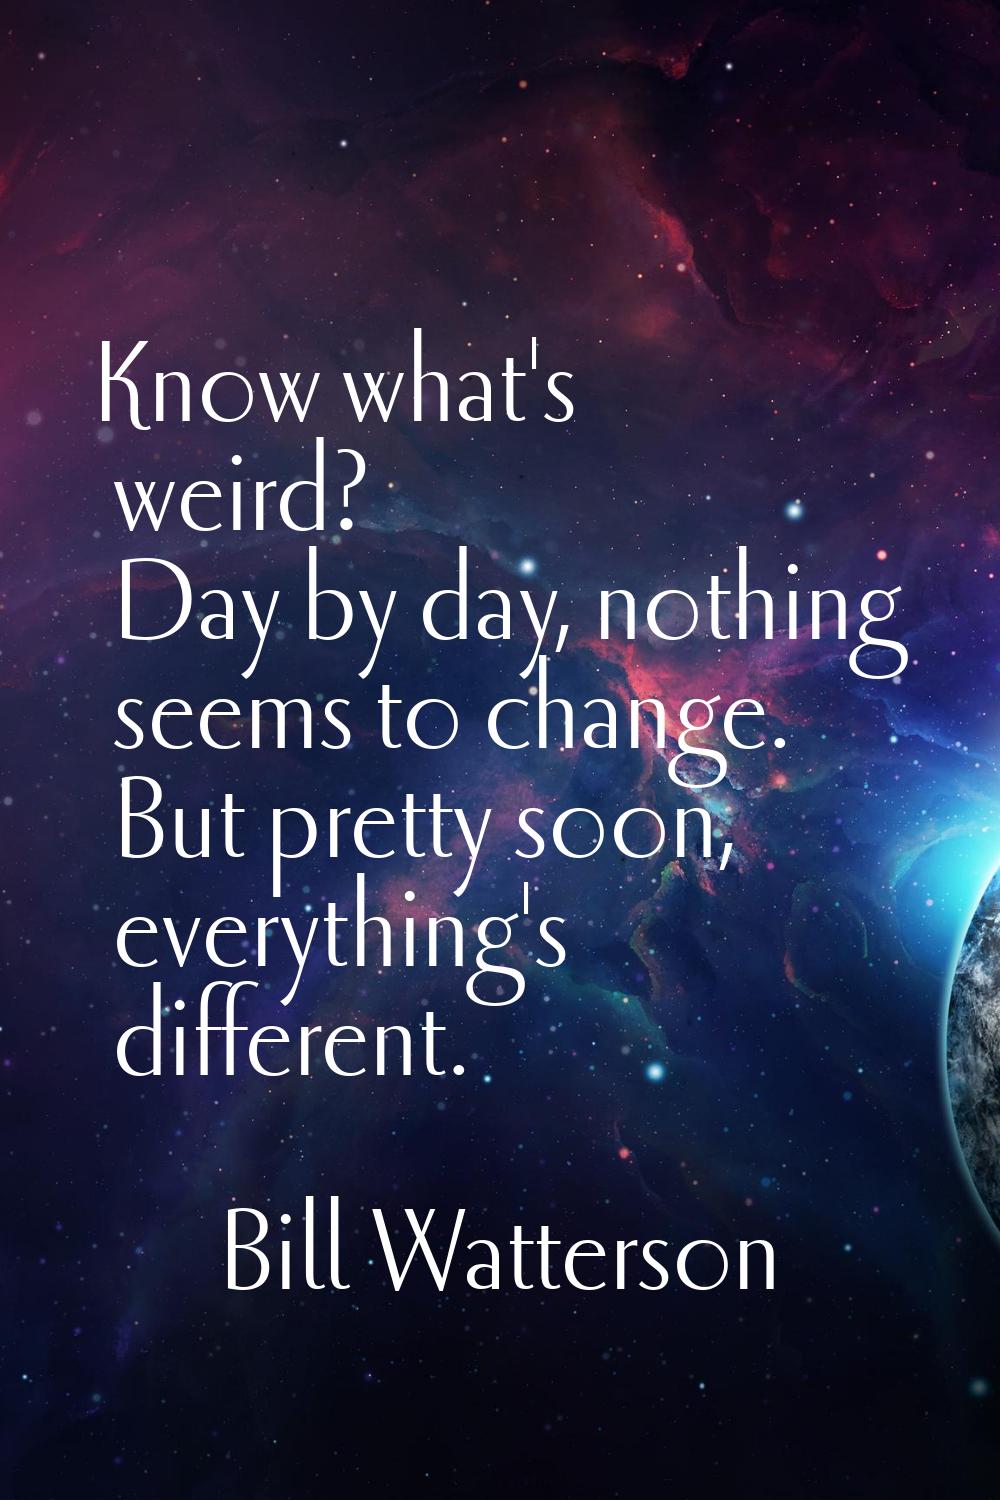 Know what's weird? Day by day, nothing seems to change. But pretty soon, everything's different.